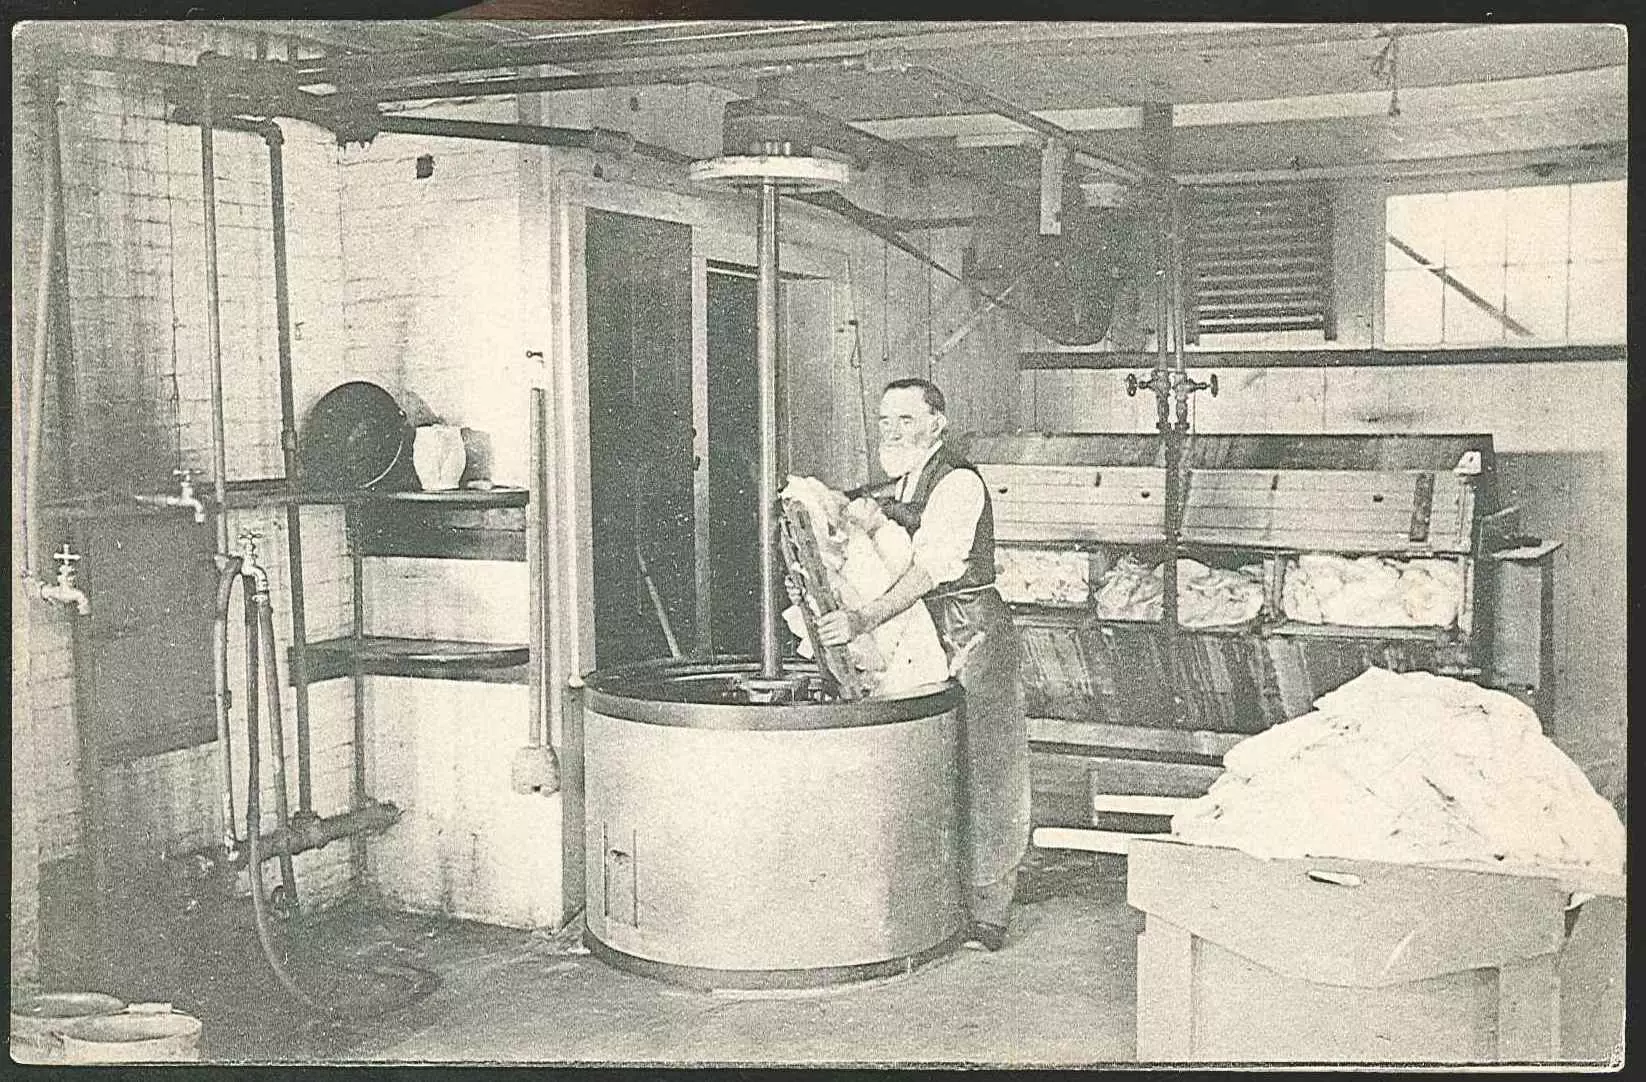 An old photo of a man working in a factory.